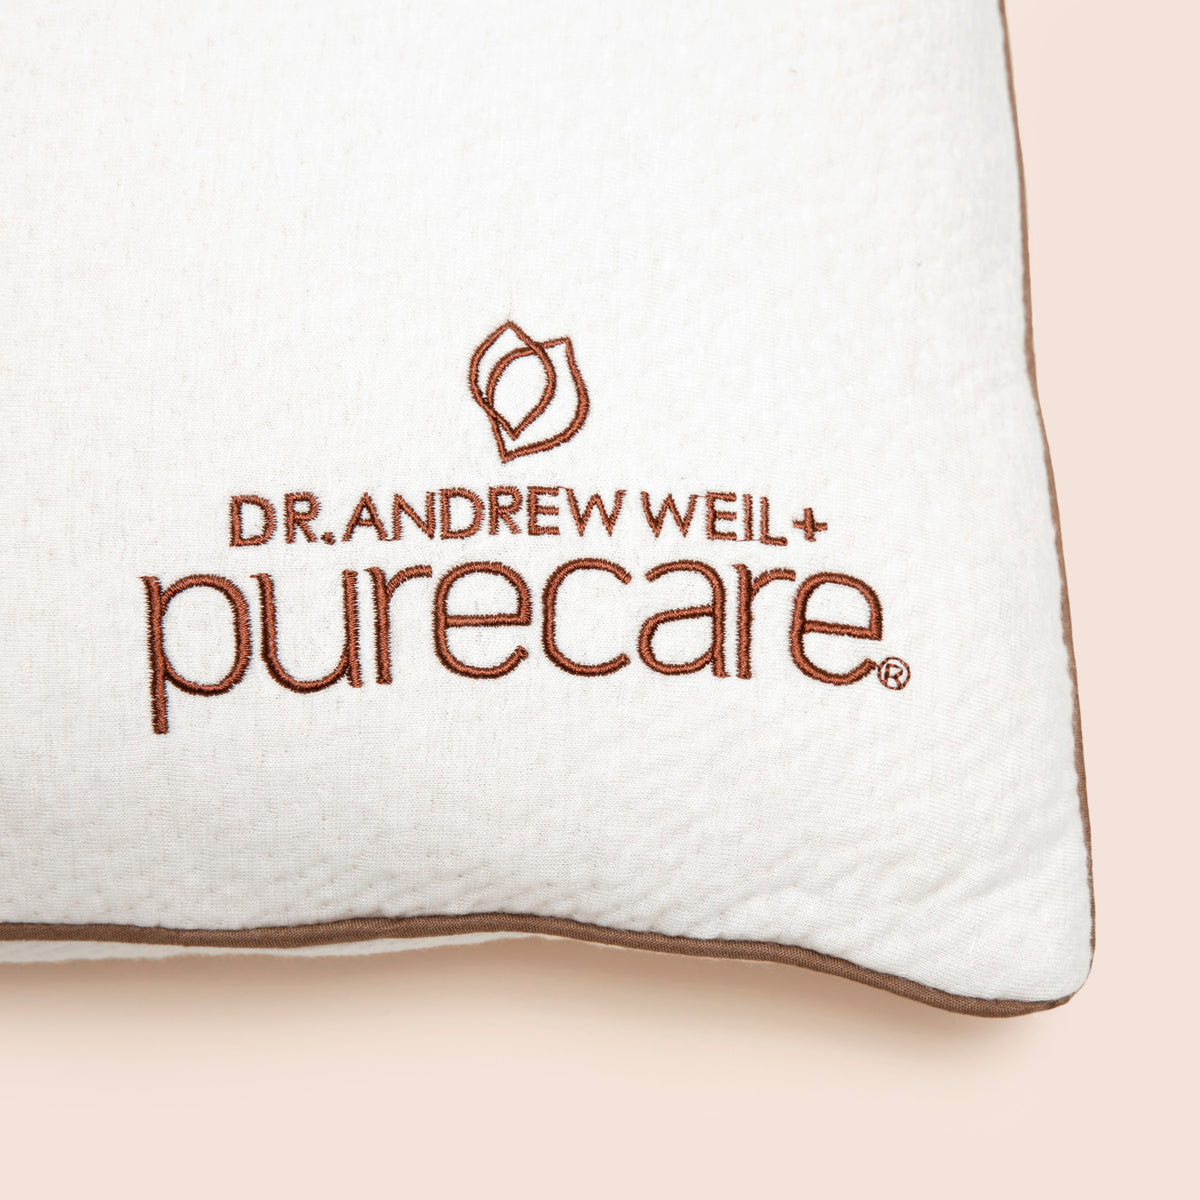 Close-up image of the Dr. Andrew Weil + Purecare logo on bottom right corner of pillow